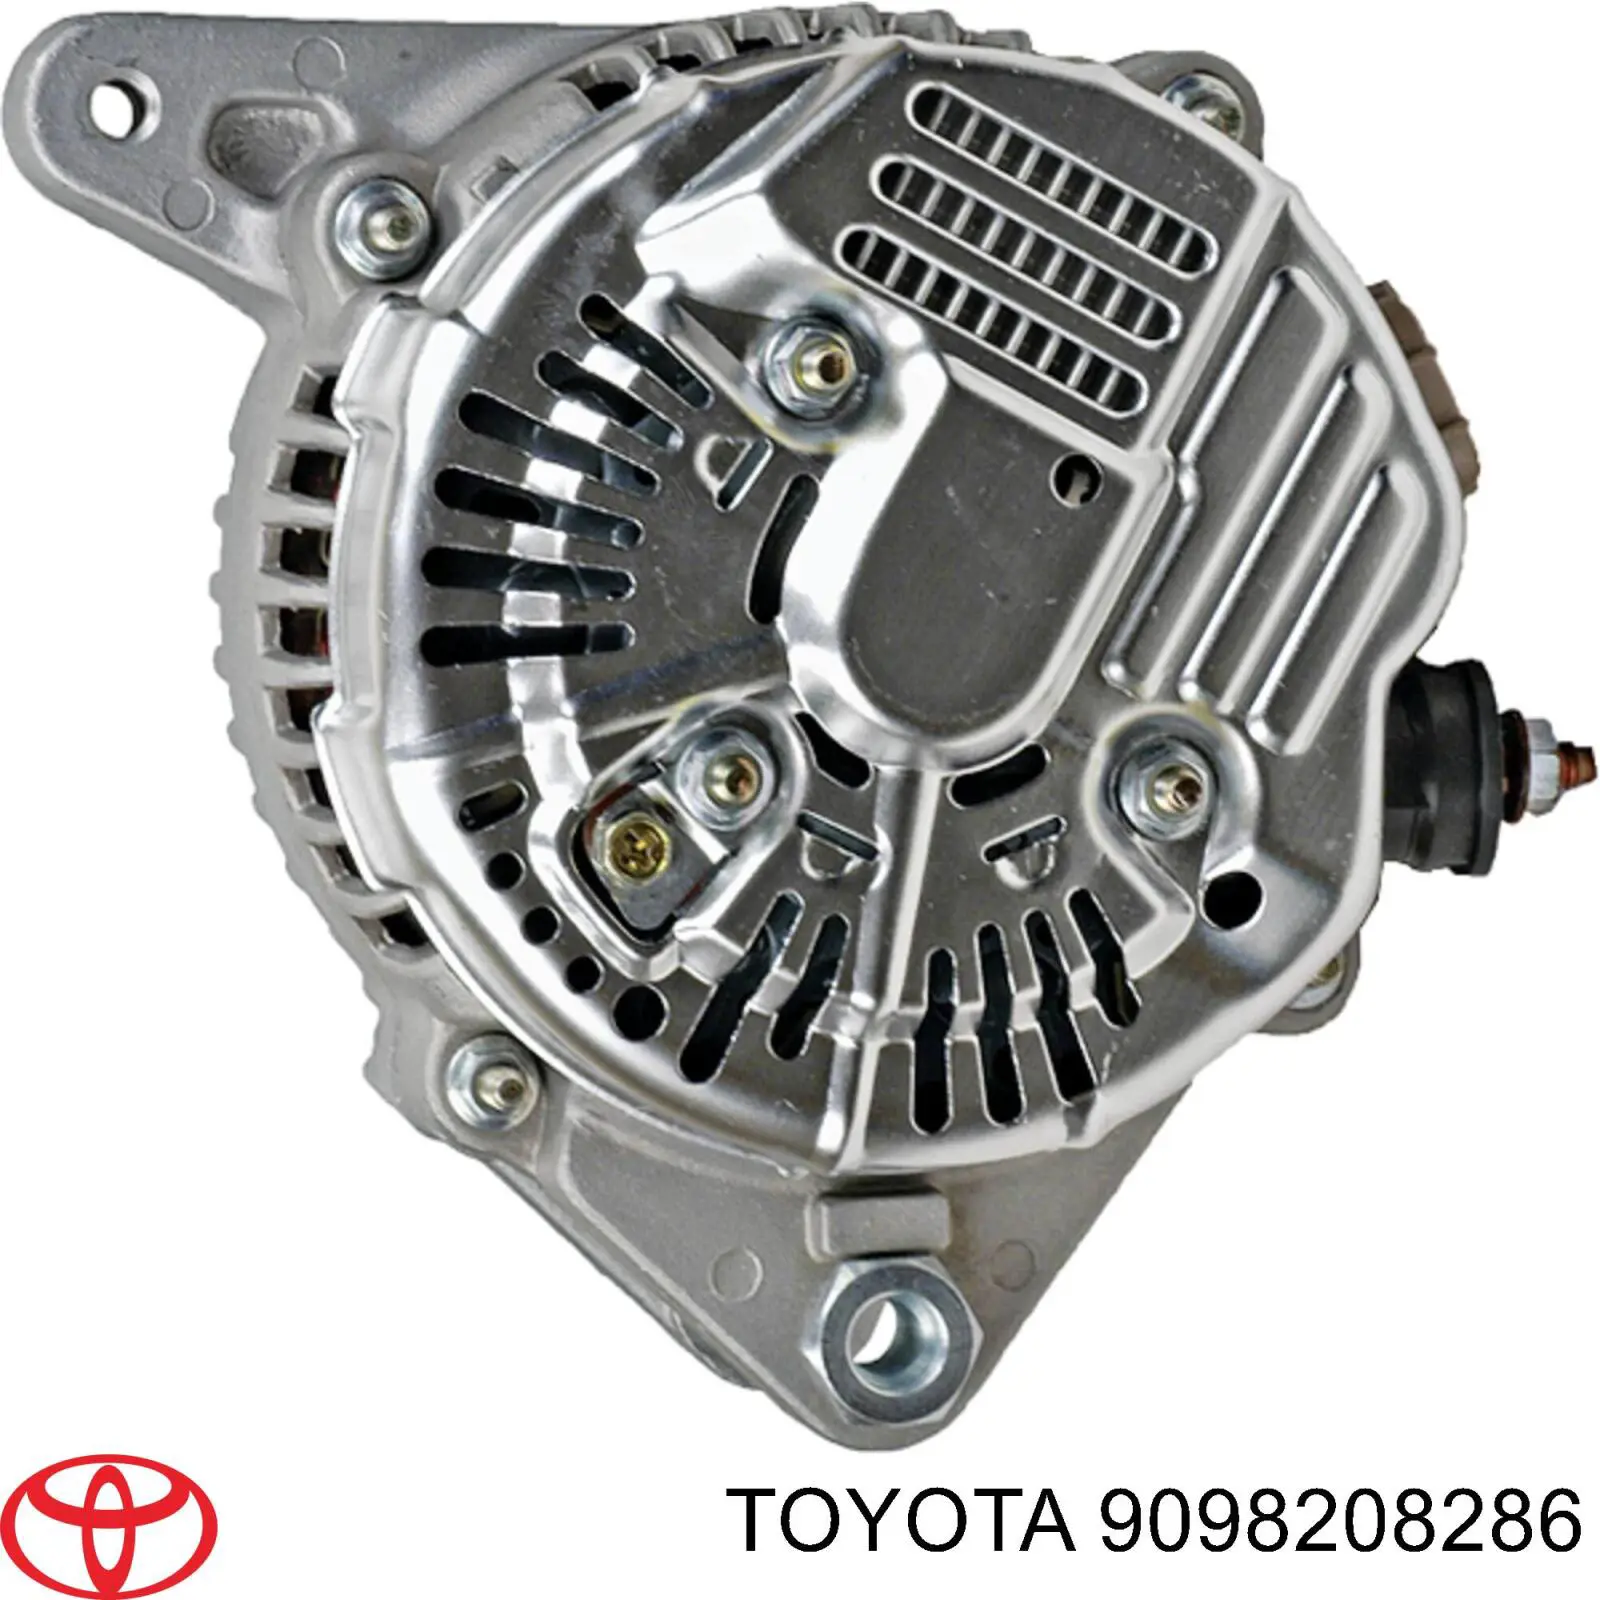 Fusible TOYOTA 9098208286